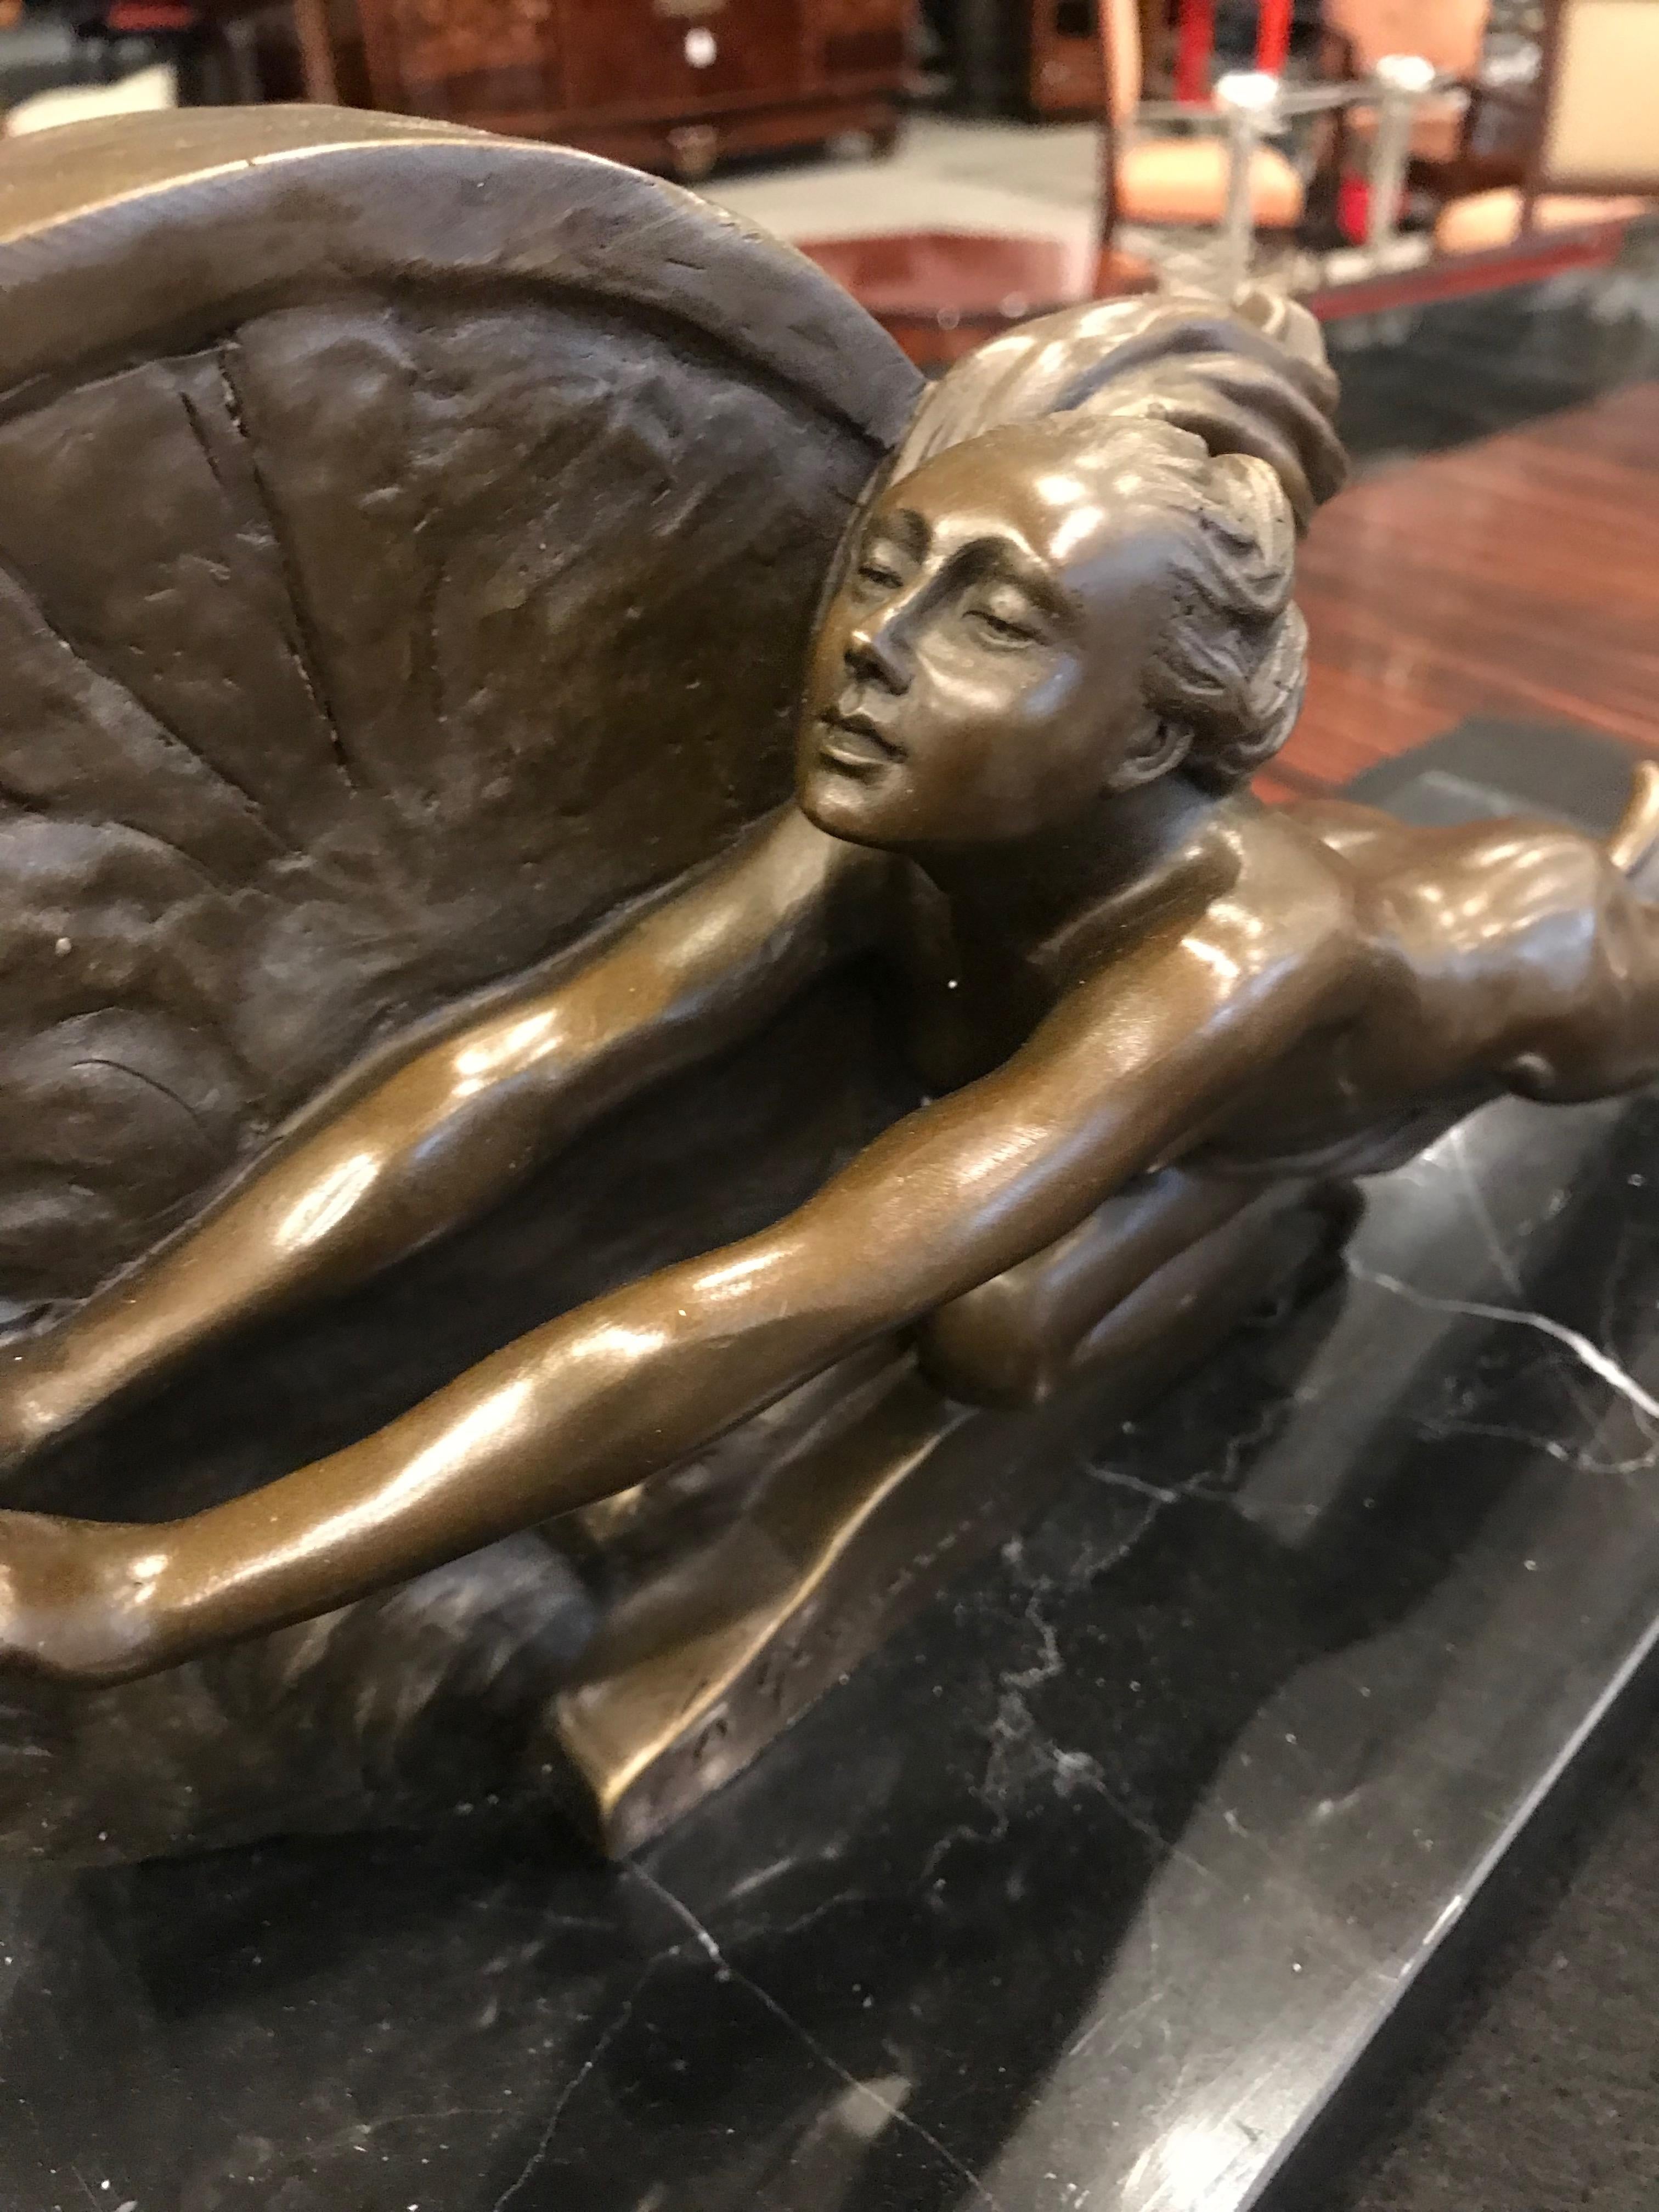 Early 20th Century Art Deco Sculpture 